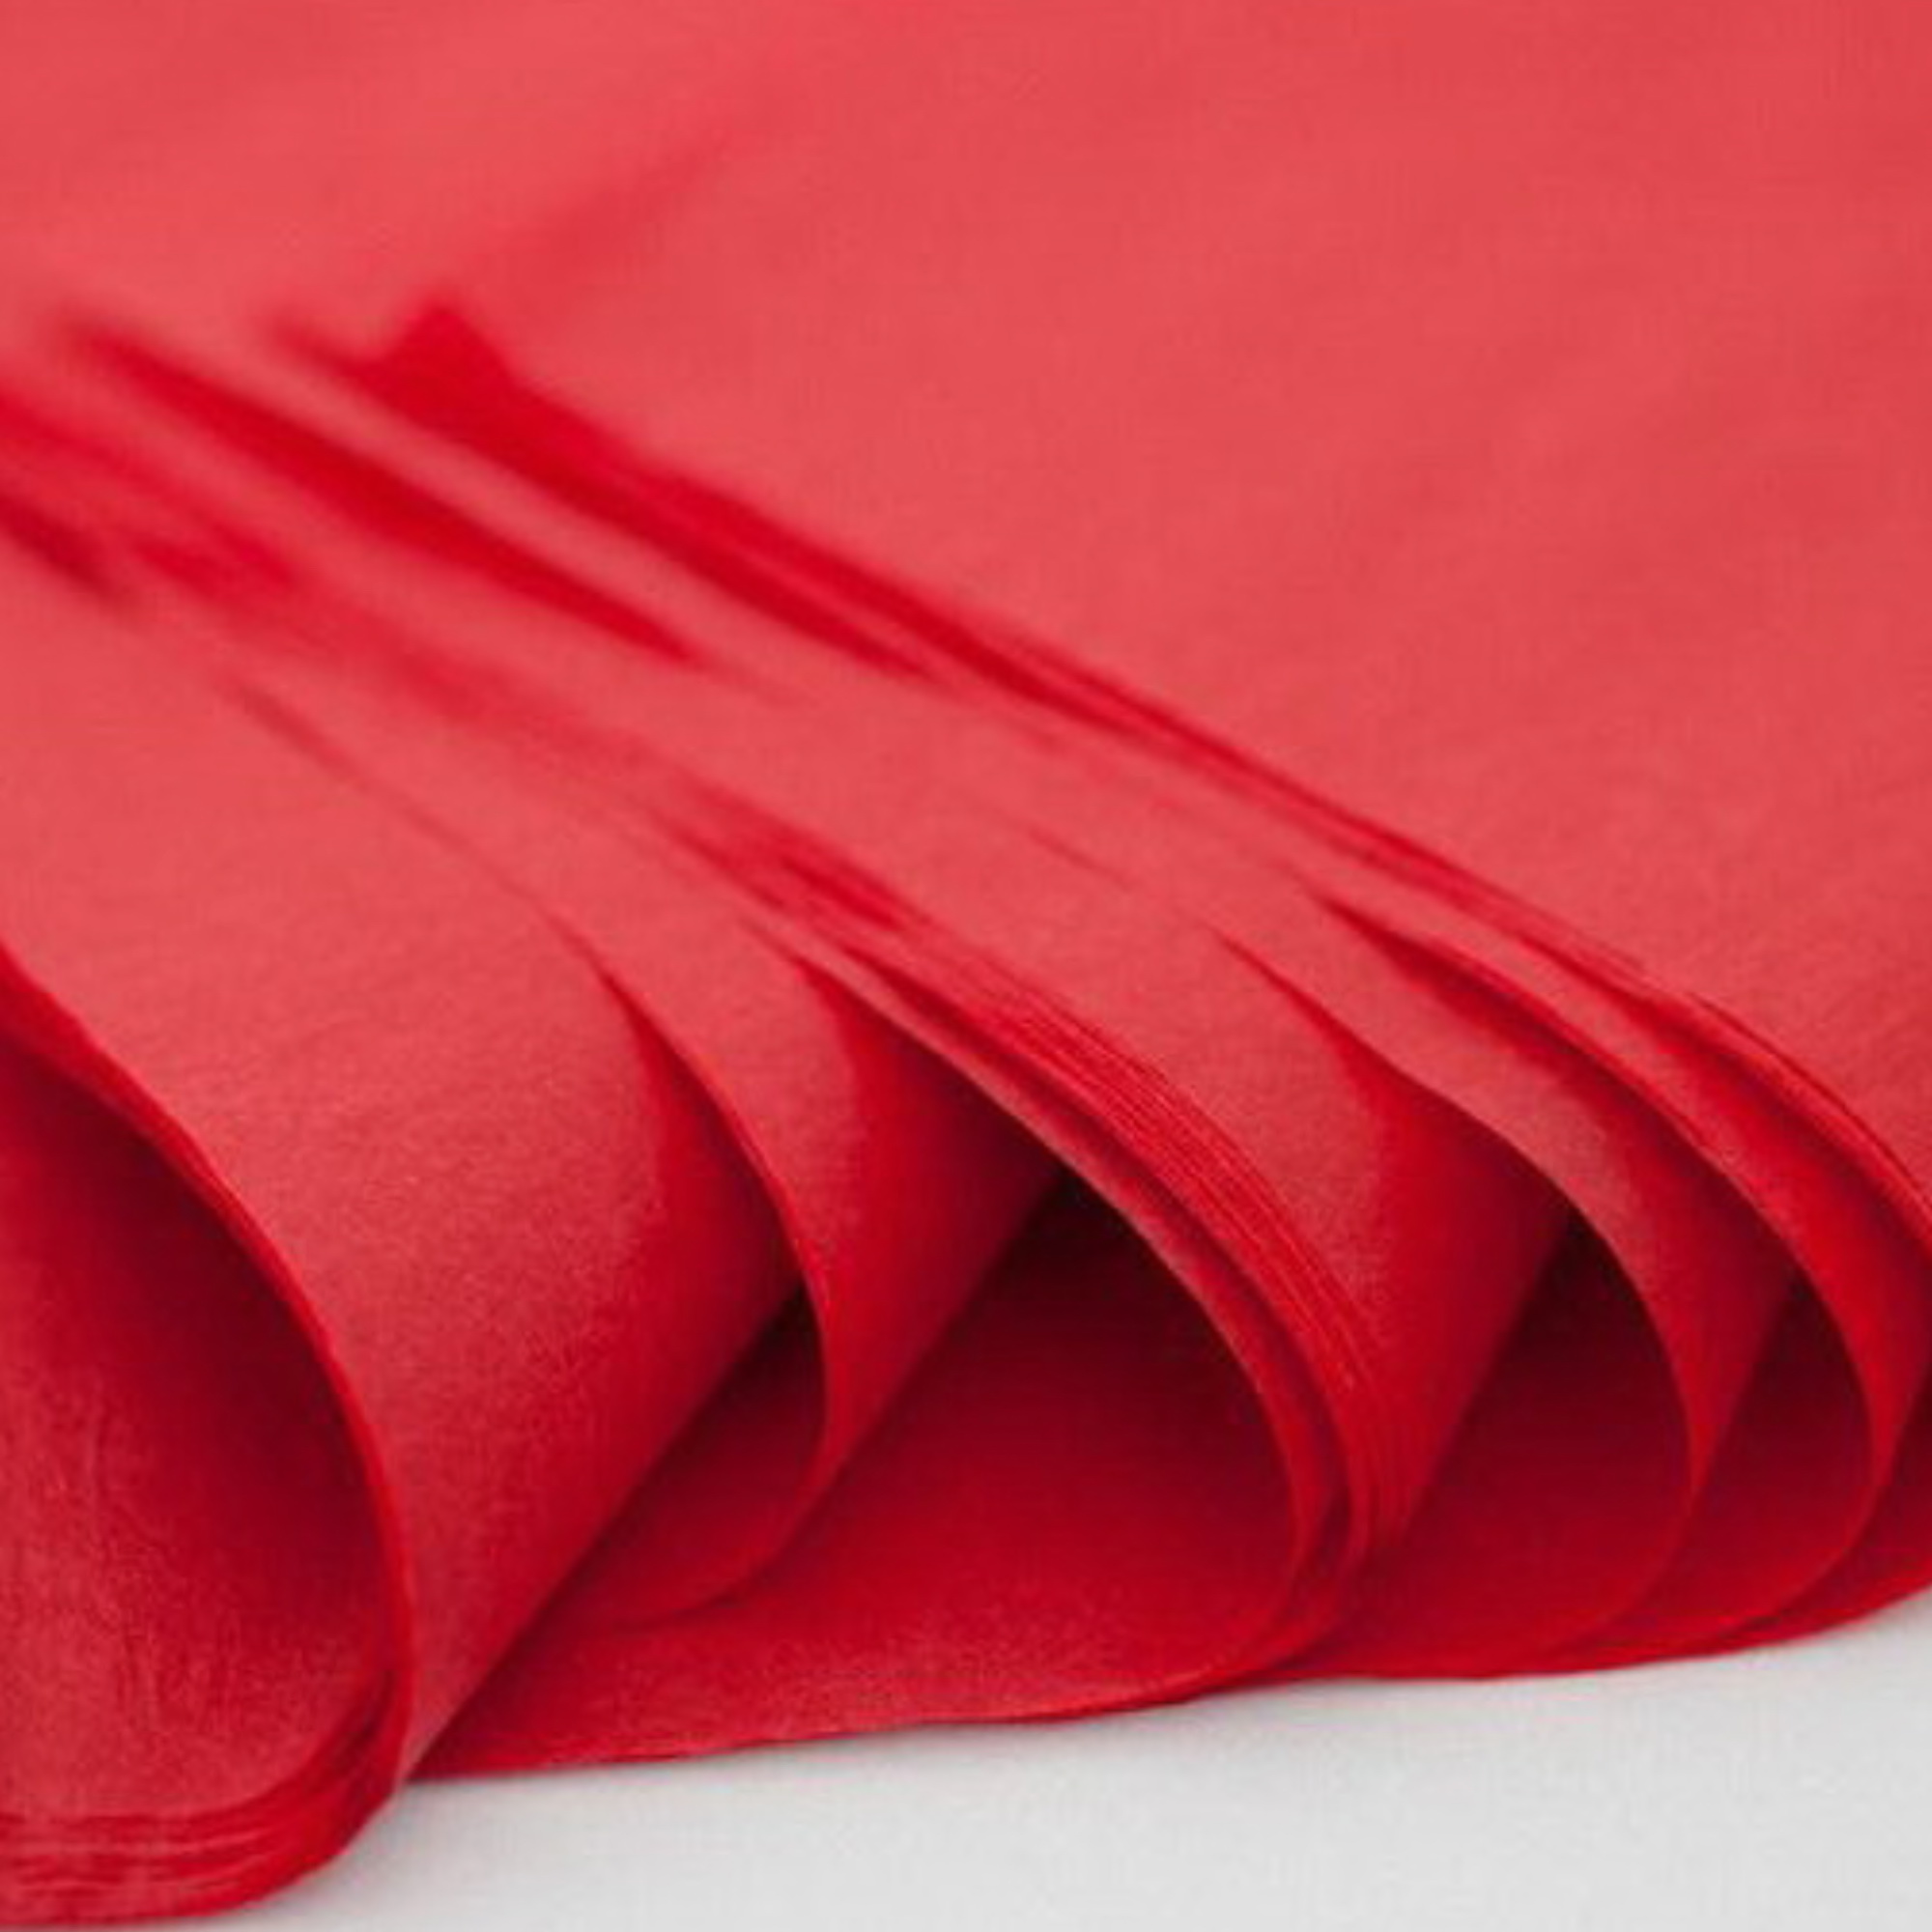 buy-500-sheets-acid-free-tissue-paper-500x750mm-17gsm-red-online